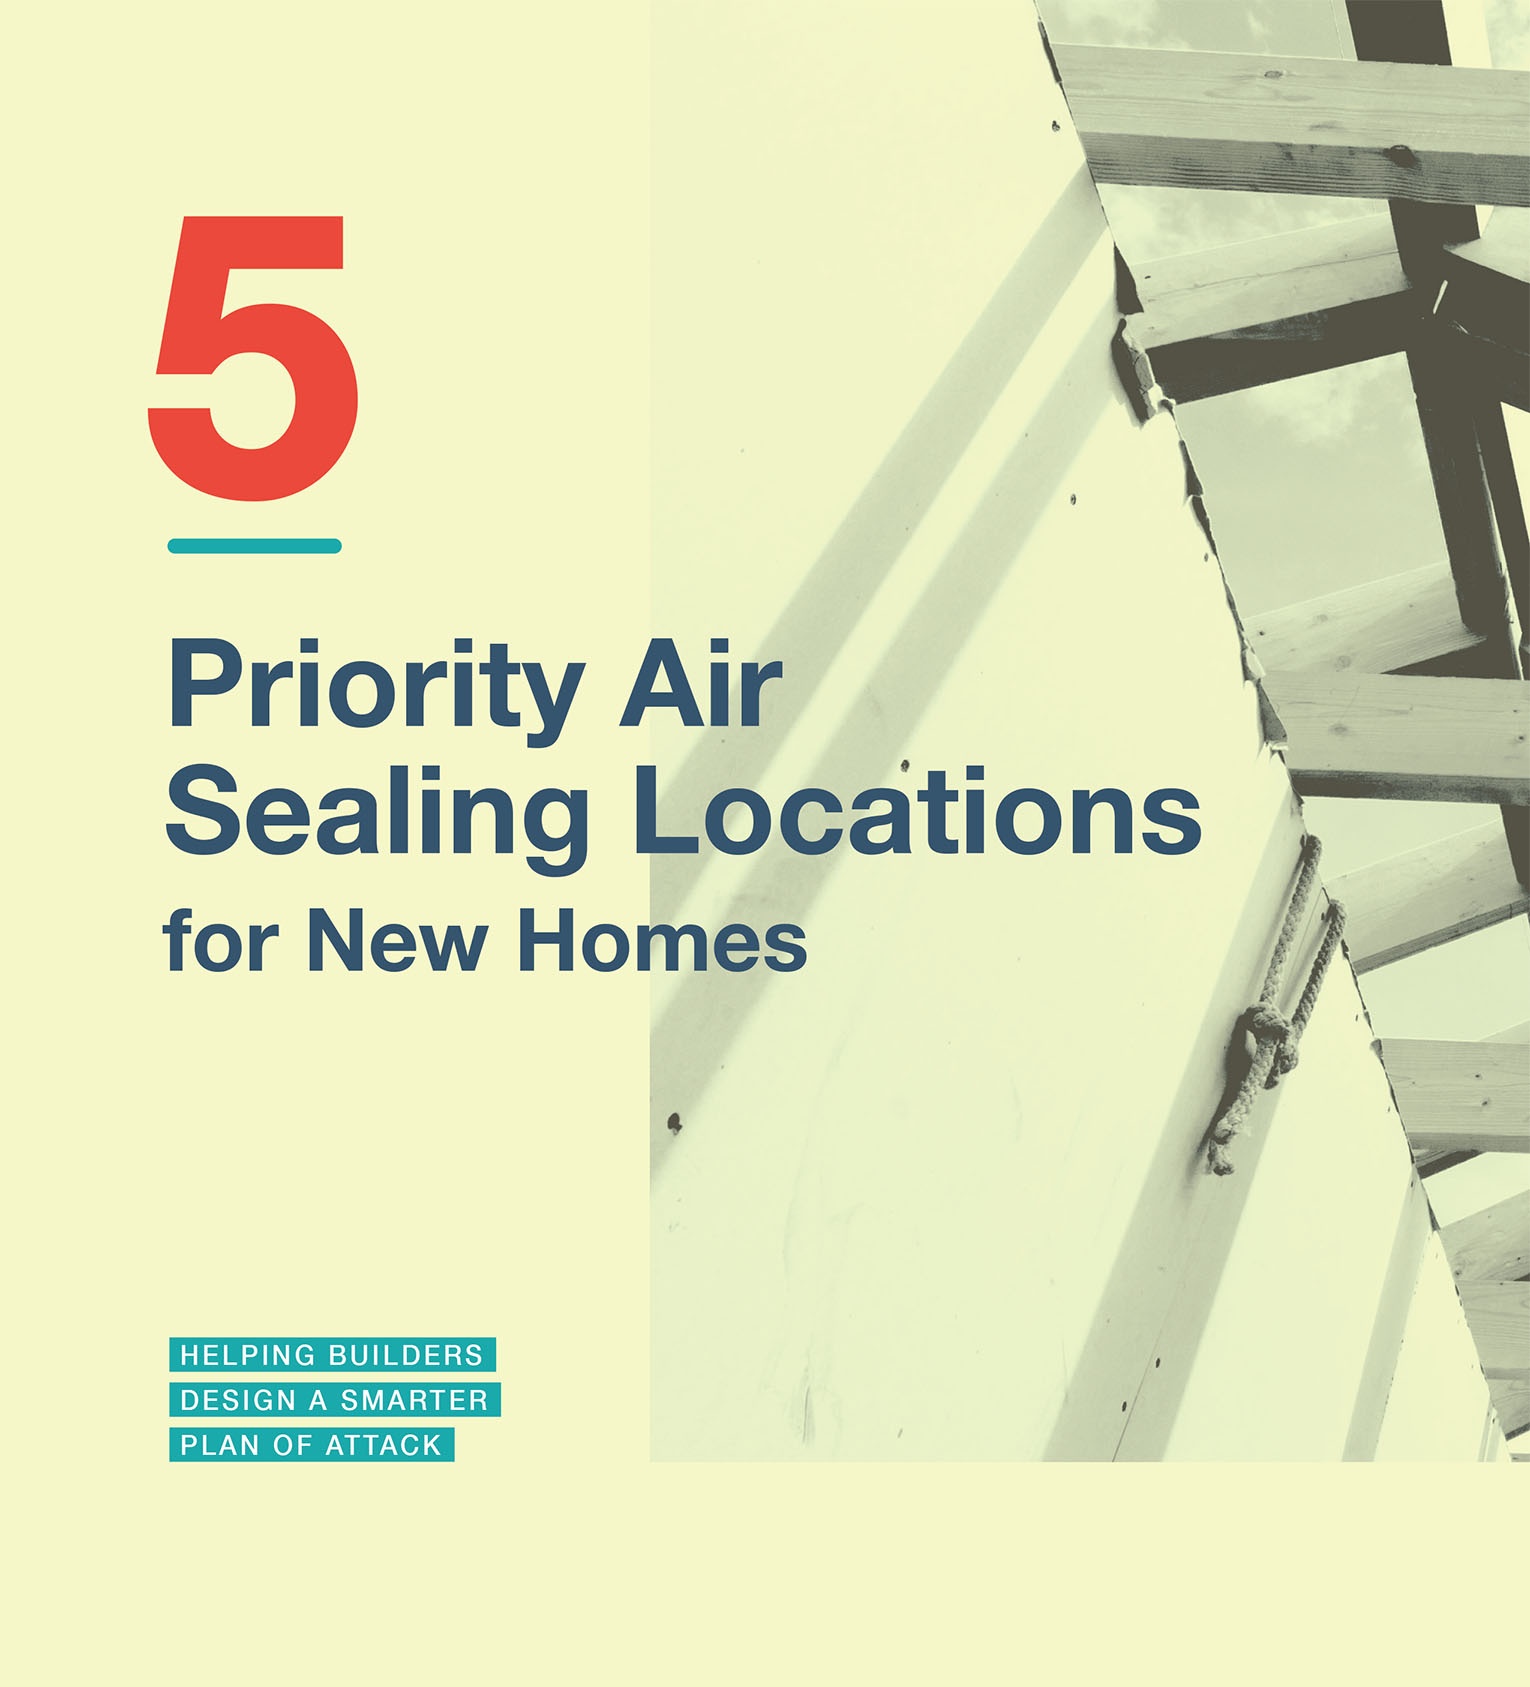 5 Priority Air Sealing Locations for New Homes